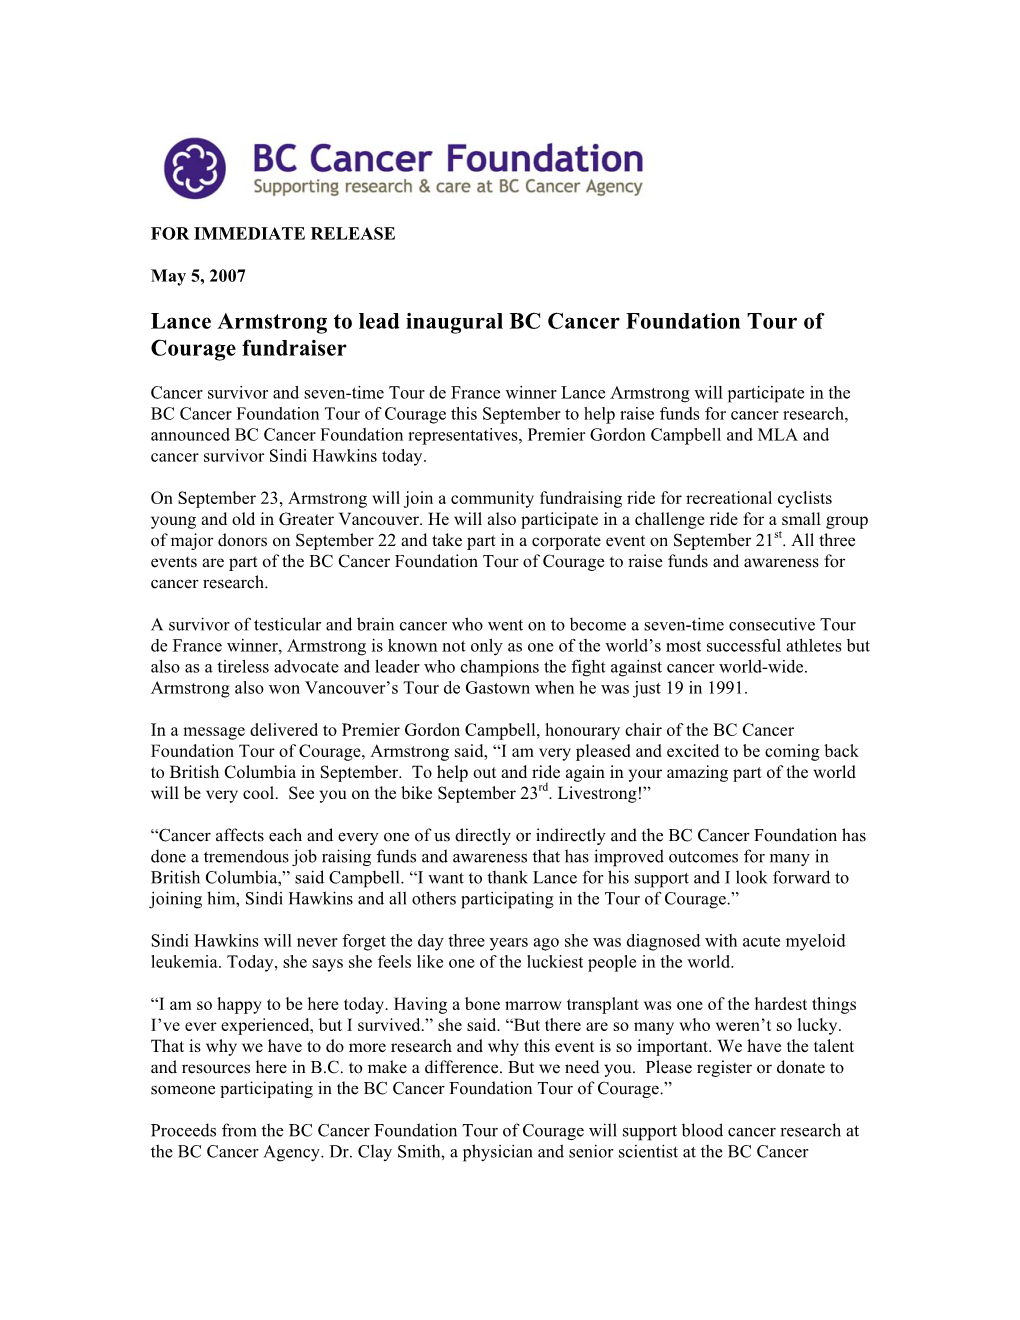 Lance Armstrong to Lead Inaugural BC Cancer Foundation Tour of Courage Fundraiser